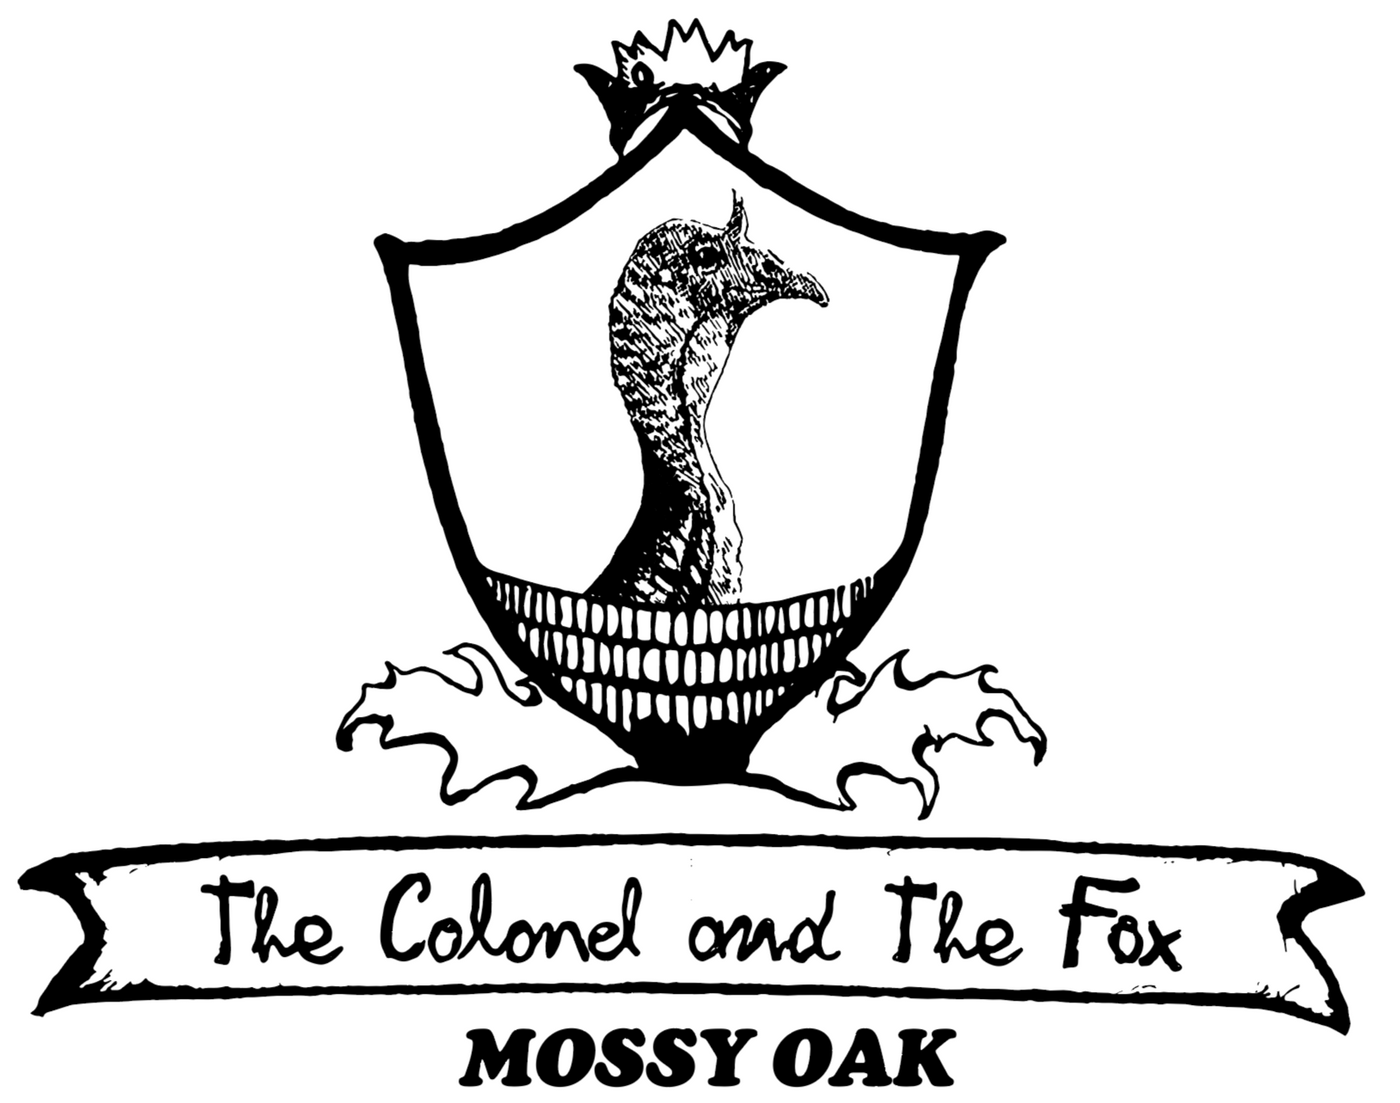 Mossy Oak's The Colonel and The Fox Decal 